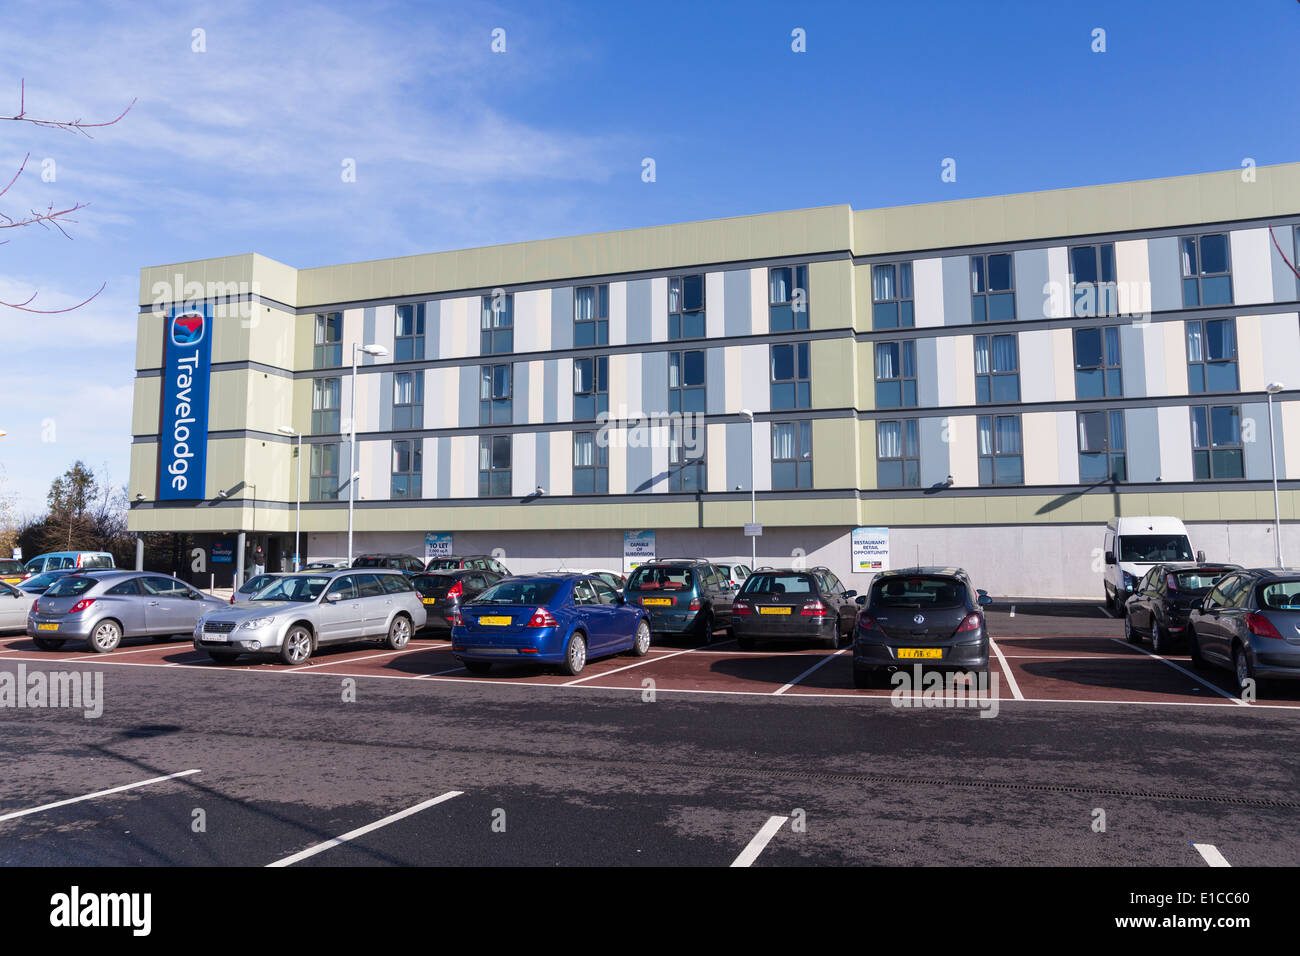 Travelodge Doncaster Lakeside Hotel Accommodation South Yorkshire Angleterre UK Banque D'Images